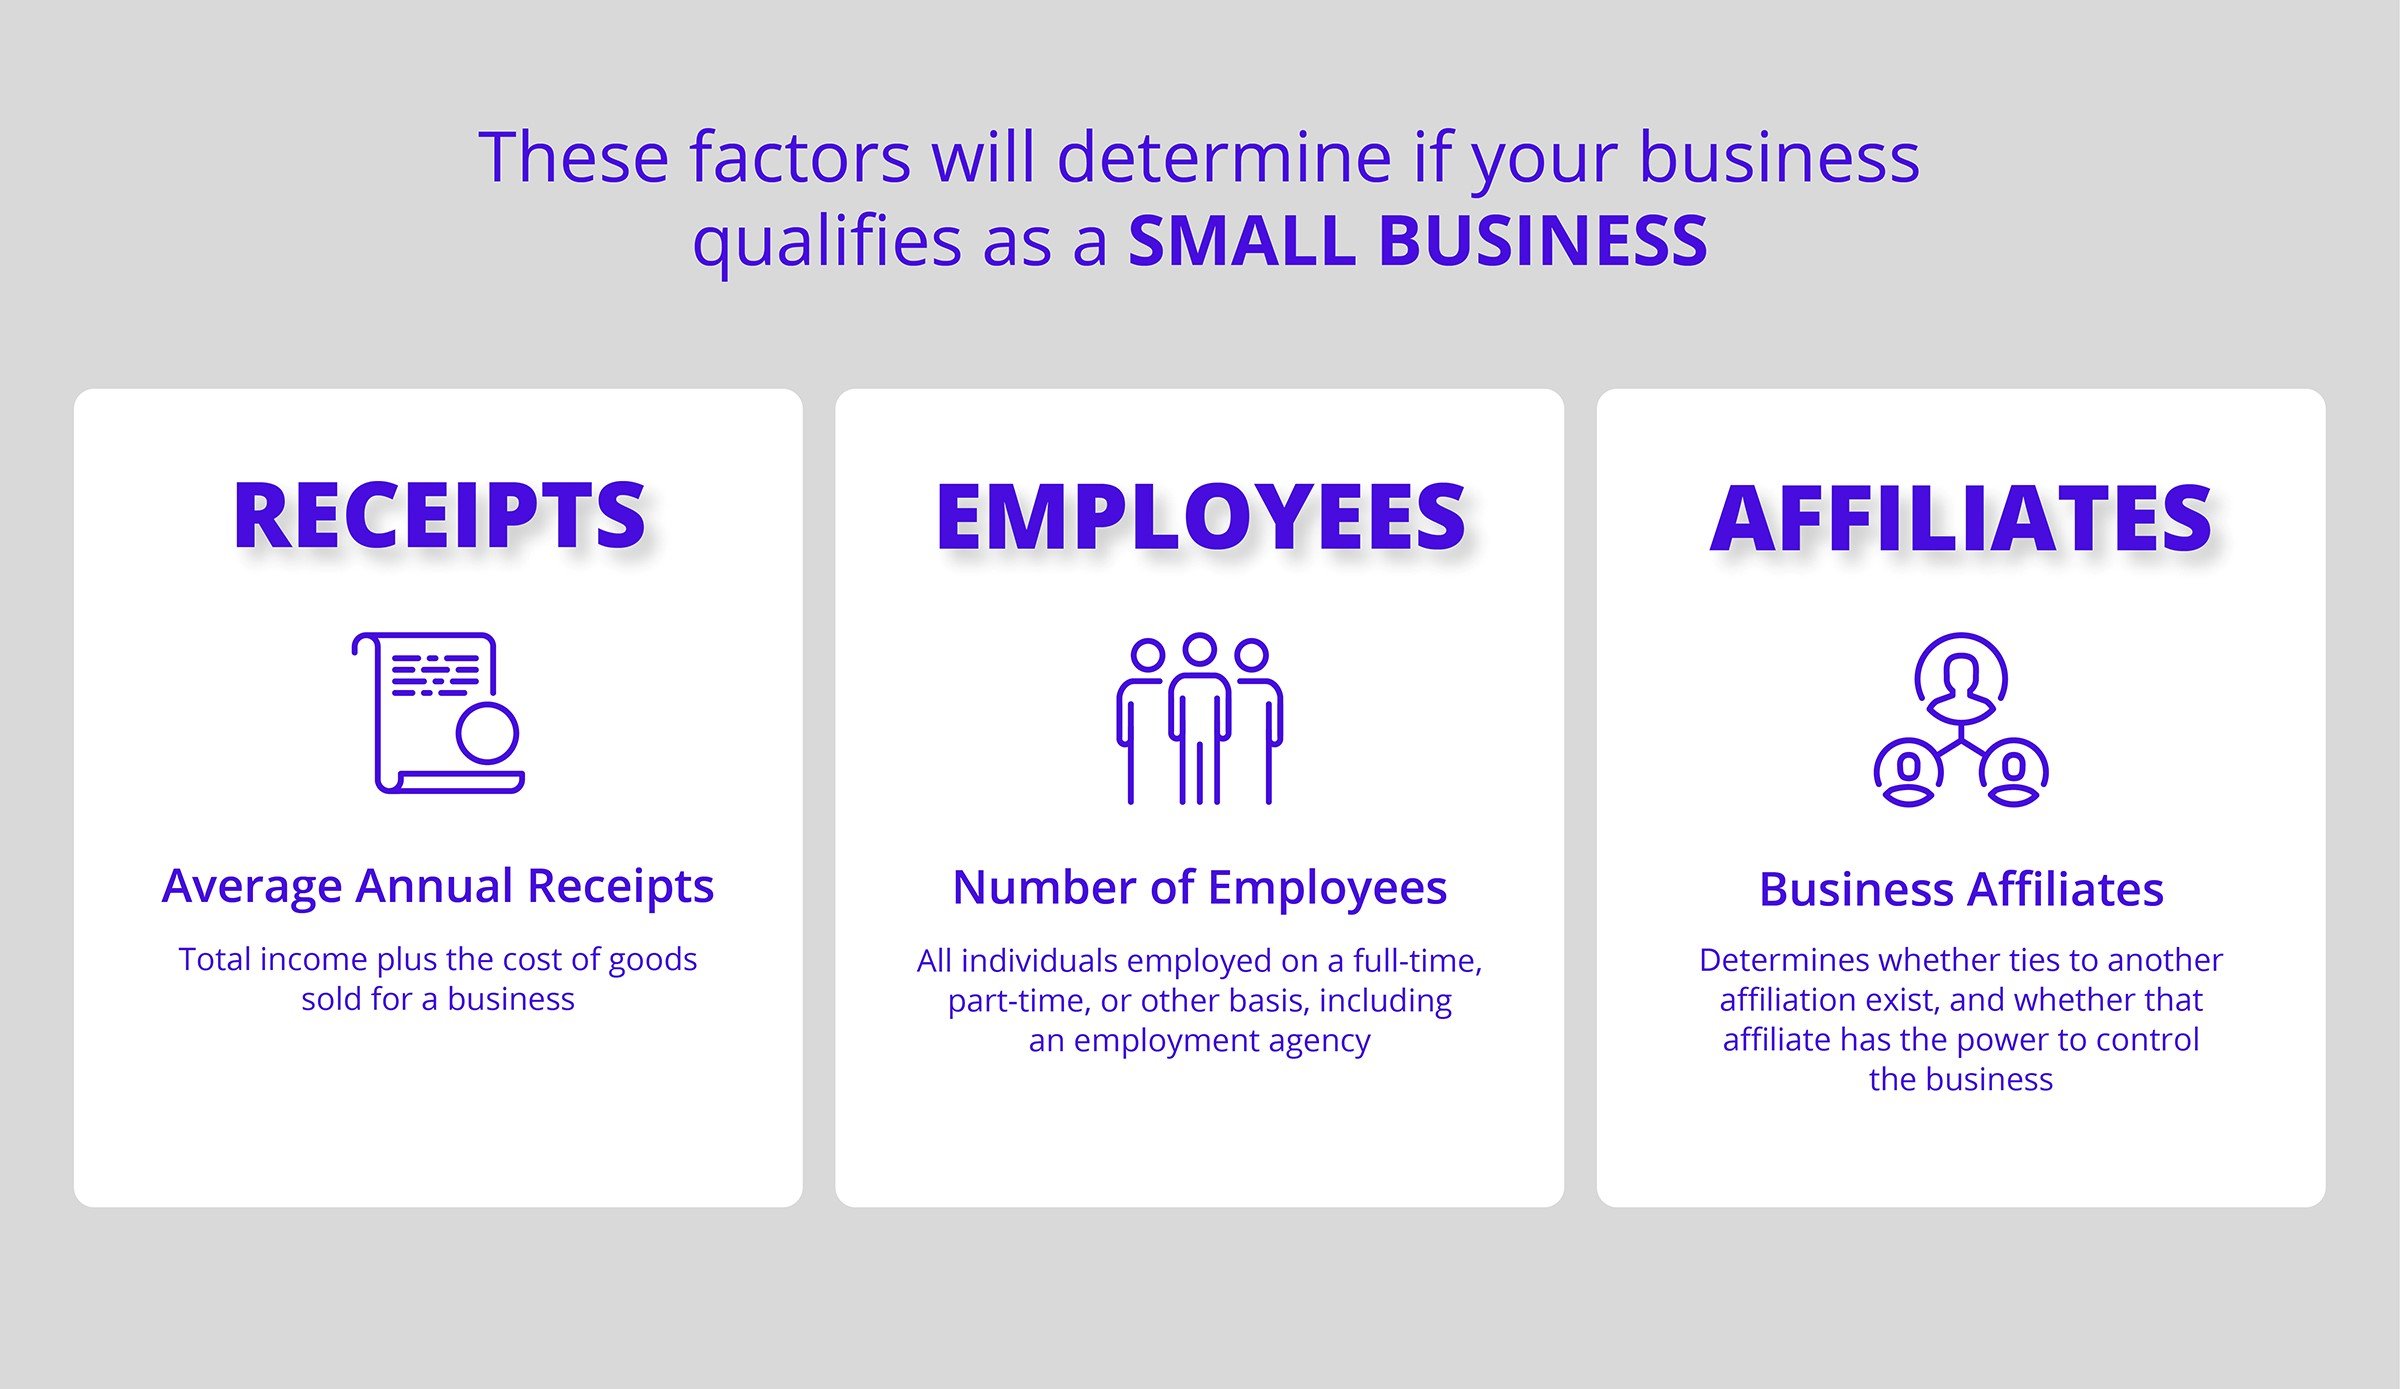 Does your business qualify as a small business?